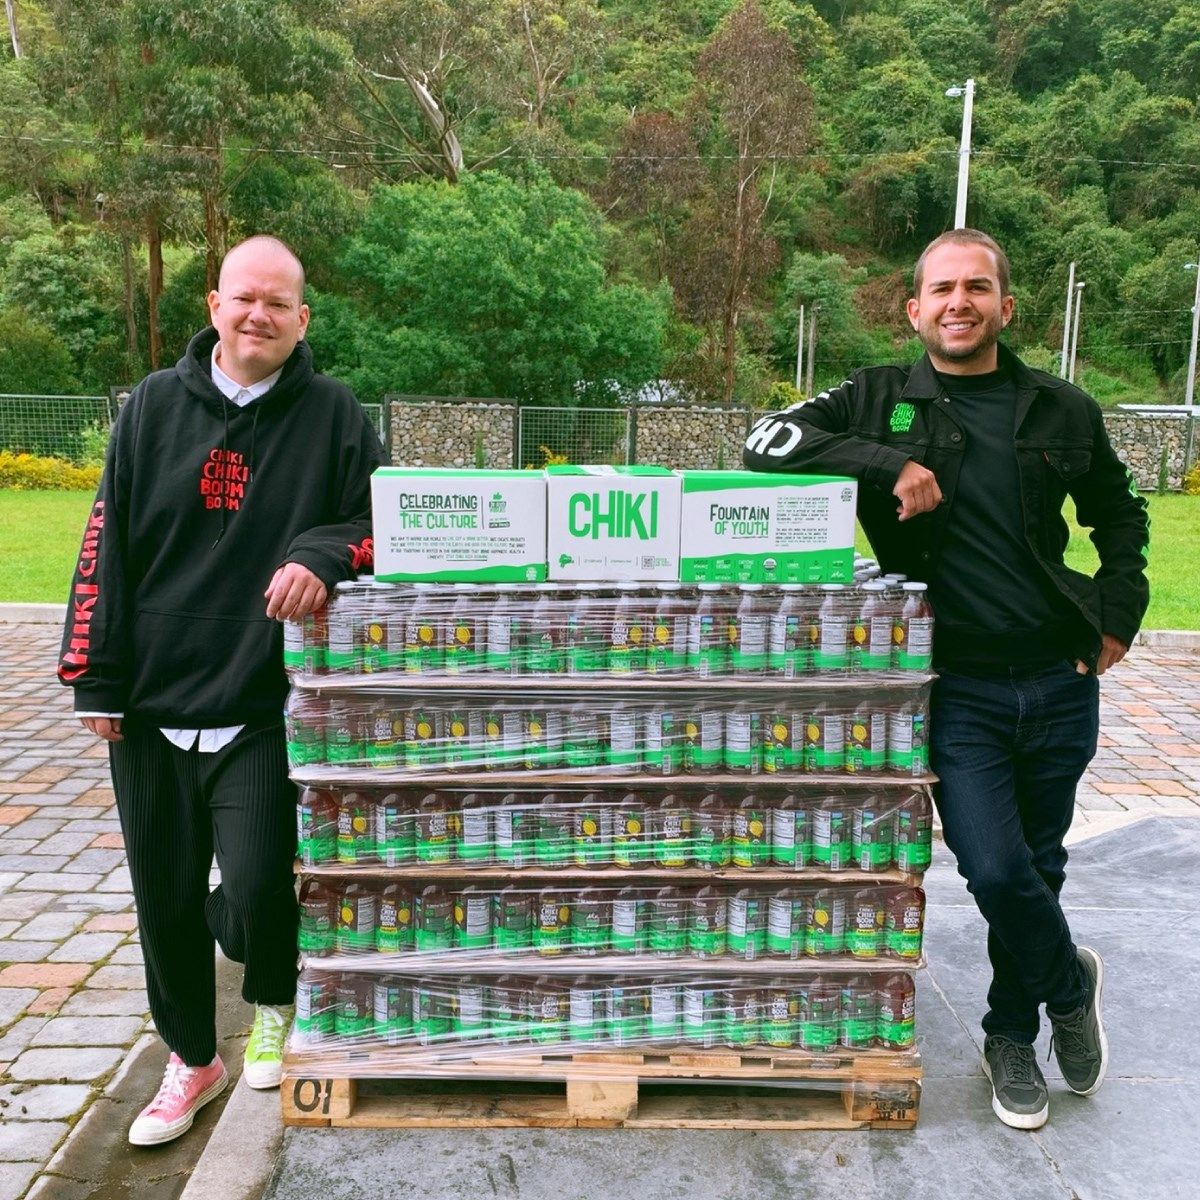 Two men standing on either side of a pallet of drinks